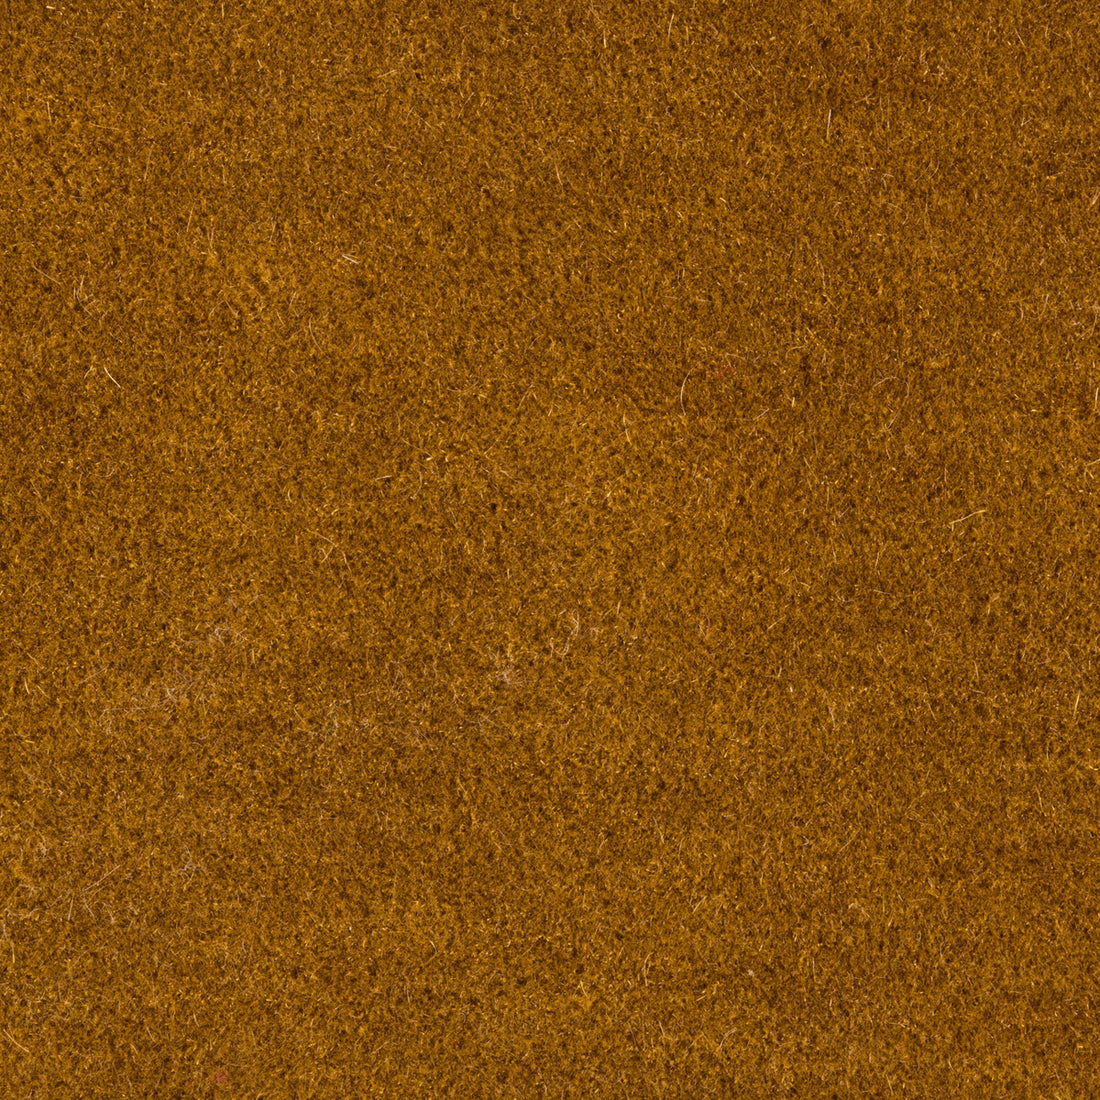 Bachelor Mohair fabric in ochre color - pattern 8014101.4.0 - by Brunschwig &amp; Fils